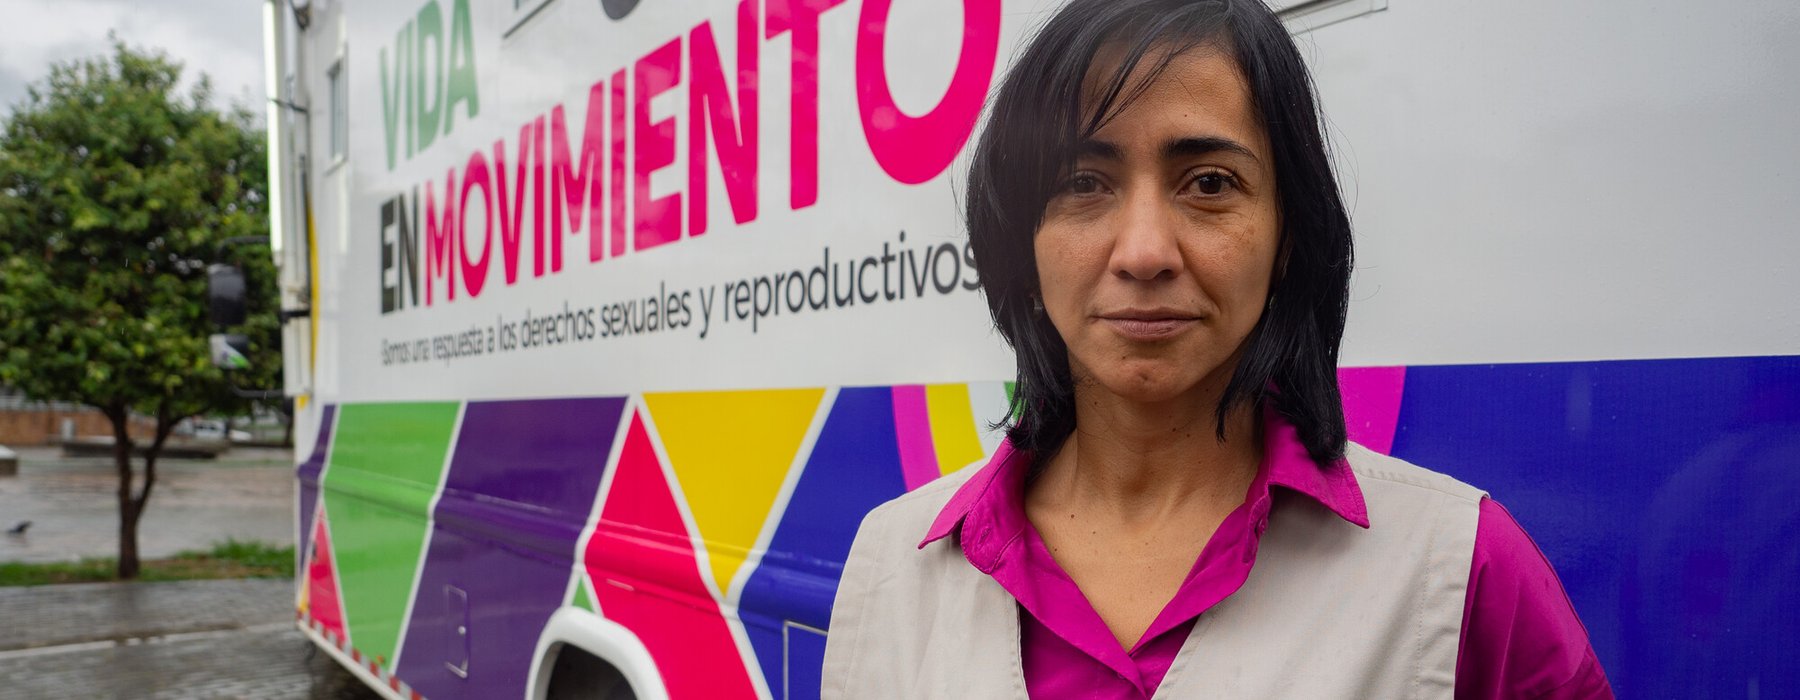 Johanna Duran Gomez, director of Fundación Mujer y Futuro, at the Sex Truck, a mobile clinic focused on reproductive health services and women’s rights in Bucaramanga, Colombia.